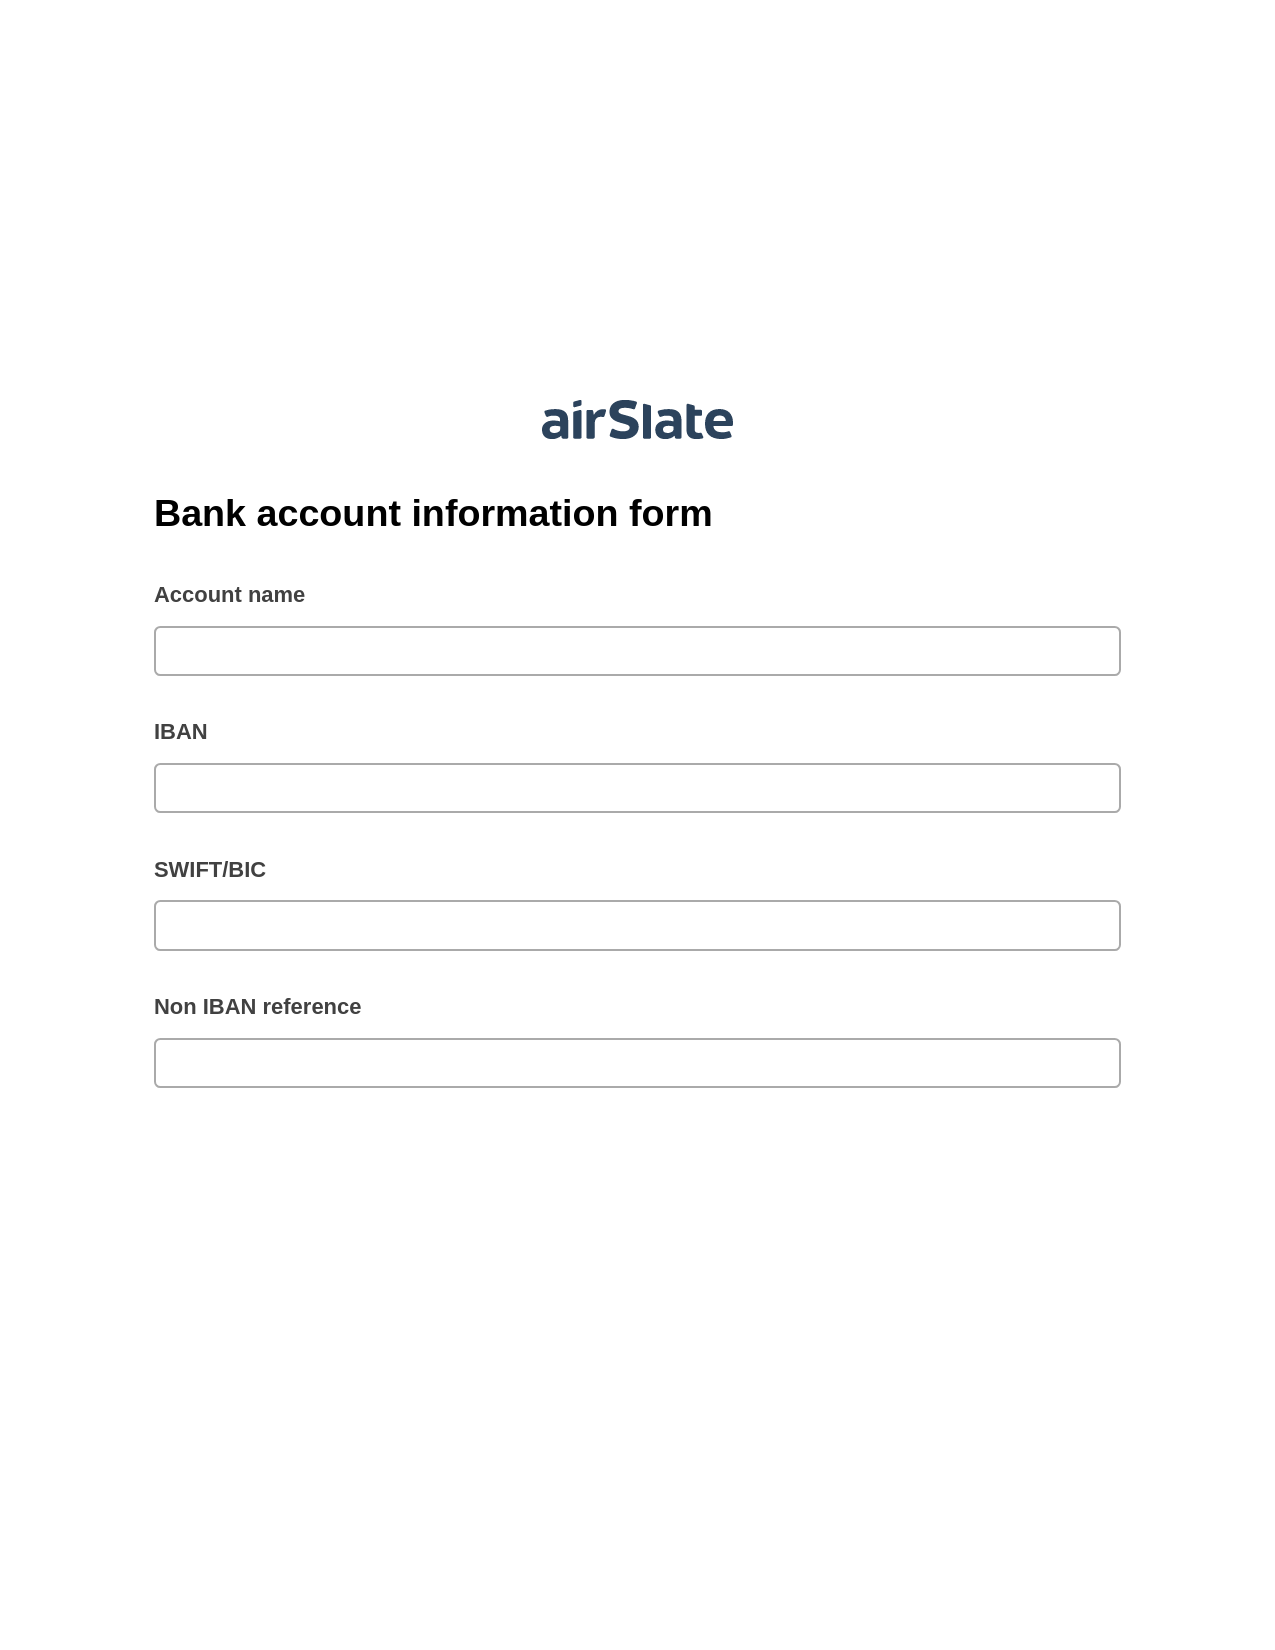 Bank account information form Pre-fill from Google Sheet Dropdown Options Bot, Document Hide Bot, Export to NetSuite Record Bot